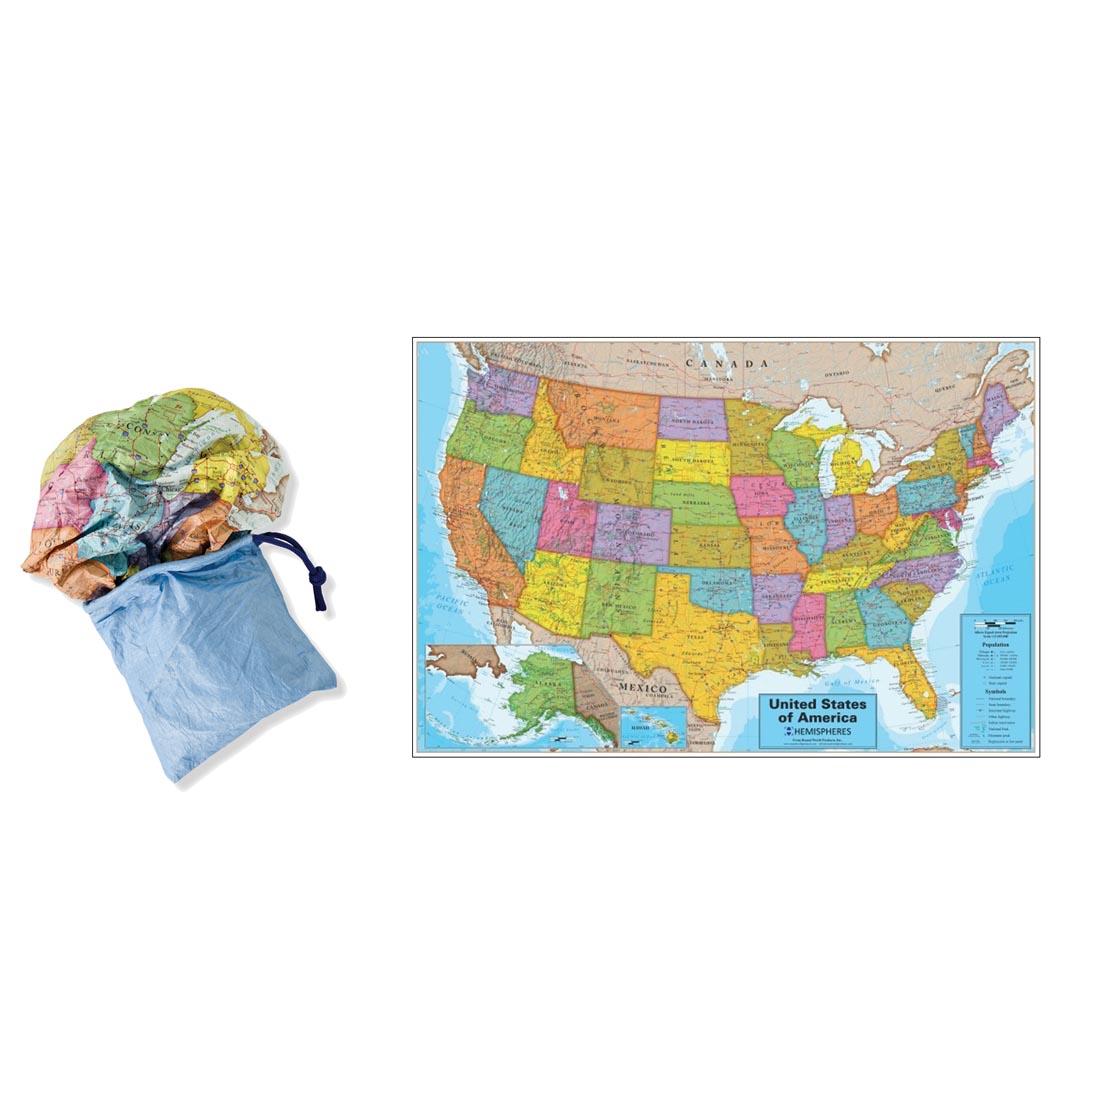 United States ScrunchMap by Round World Products shown both flat and scrunched into its pouch